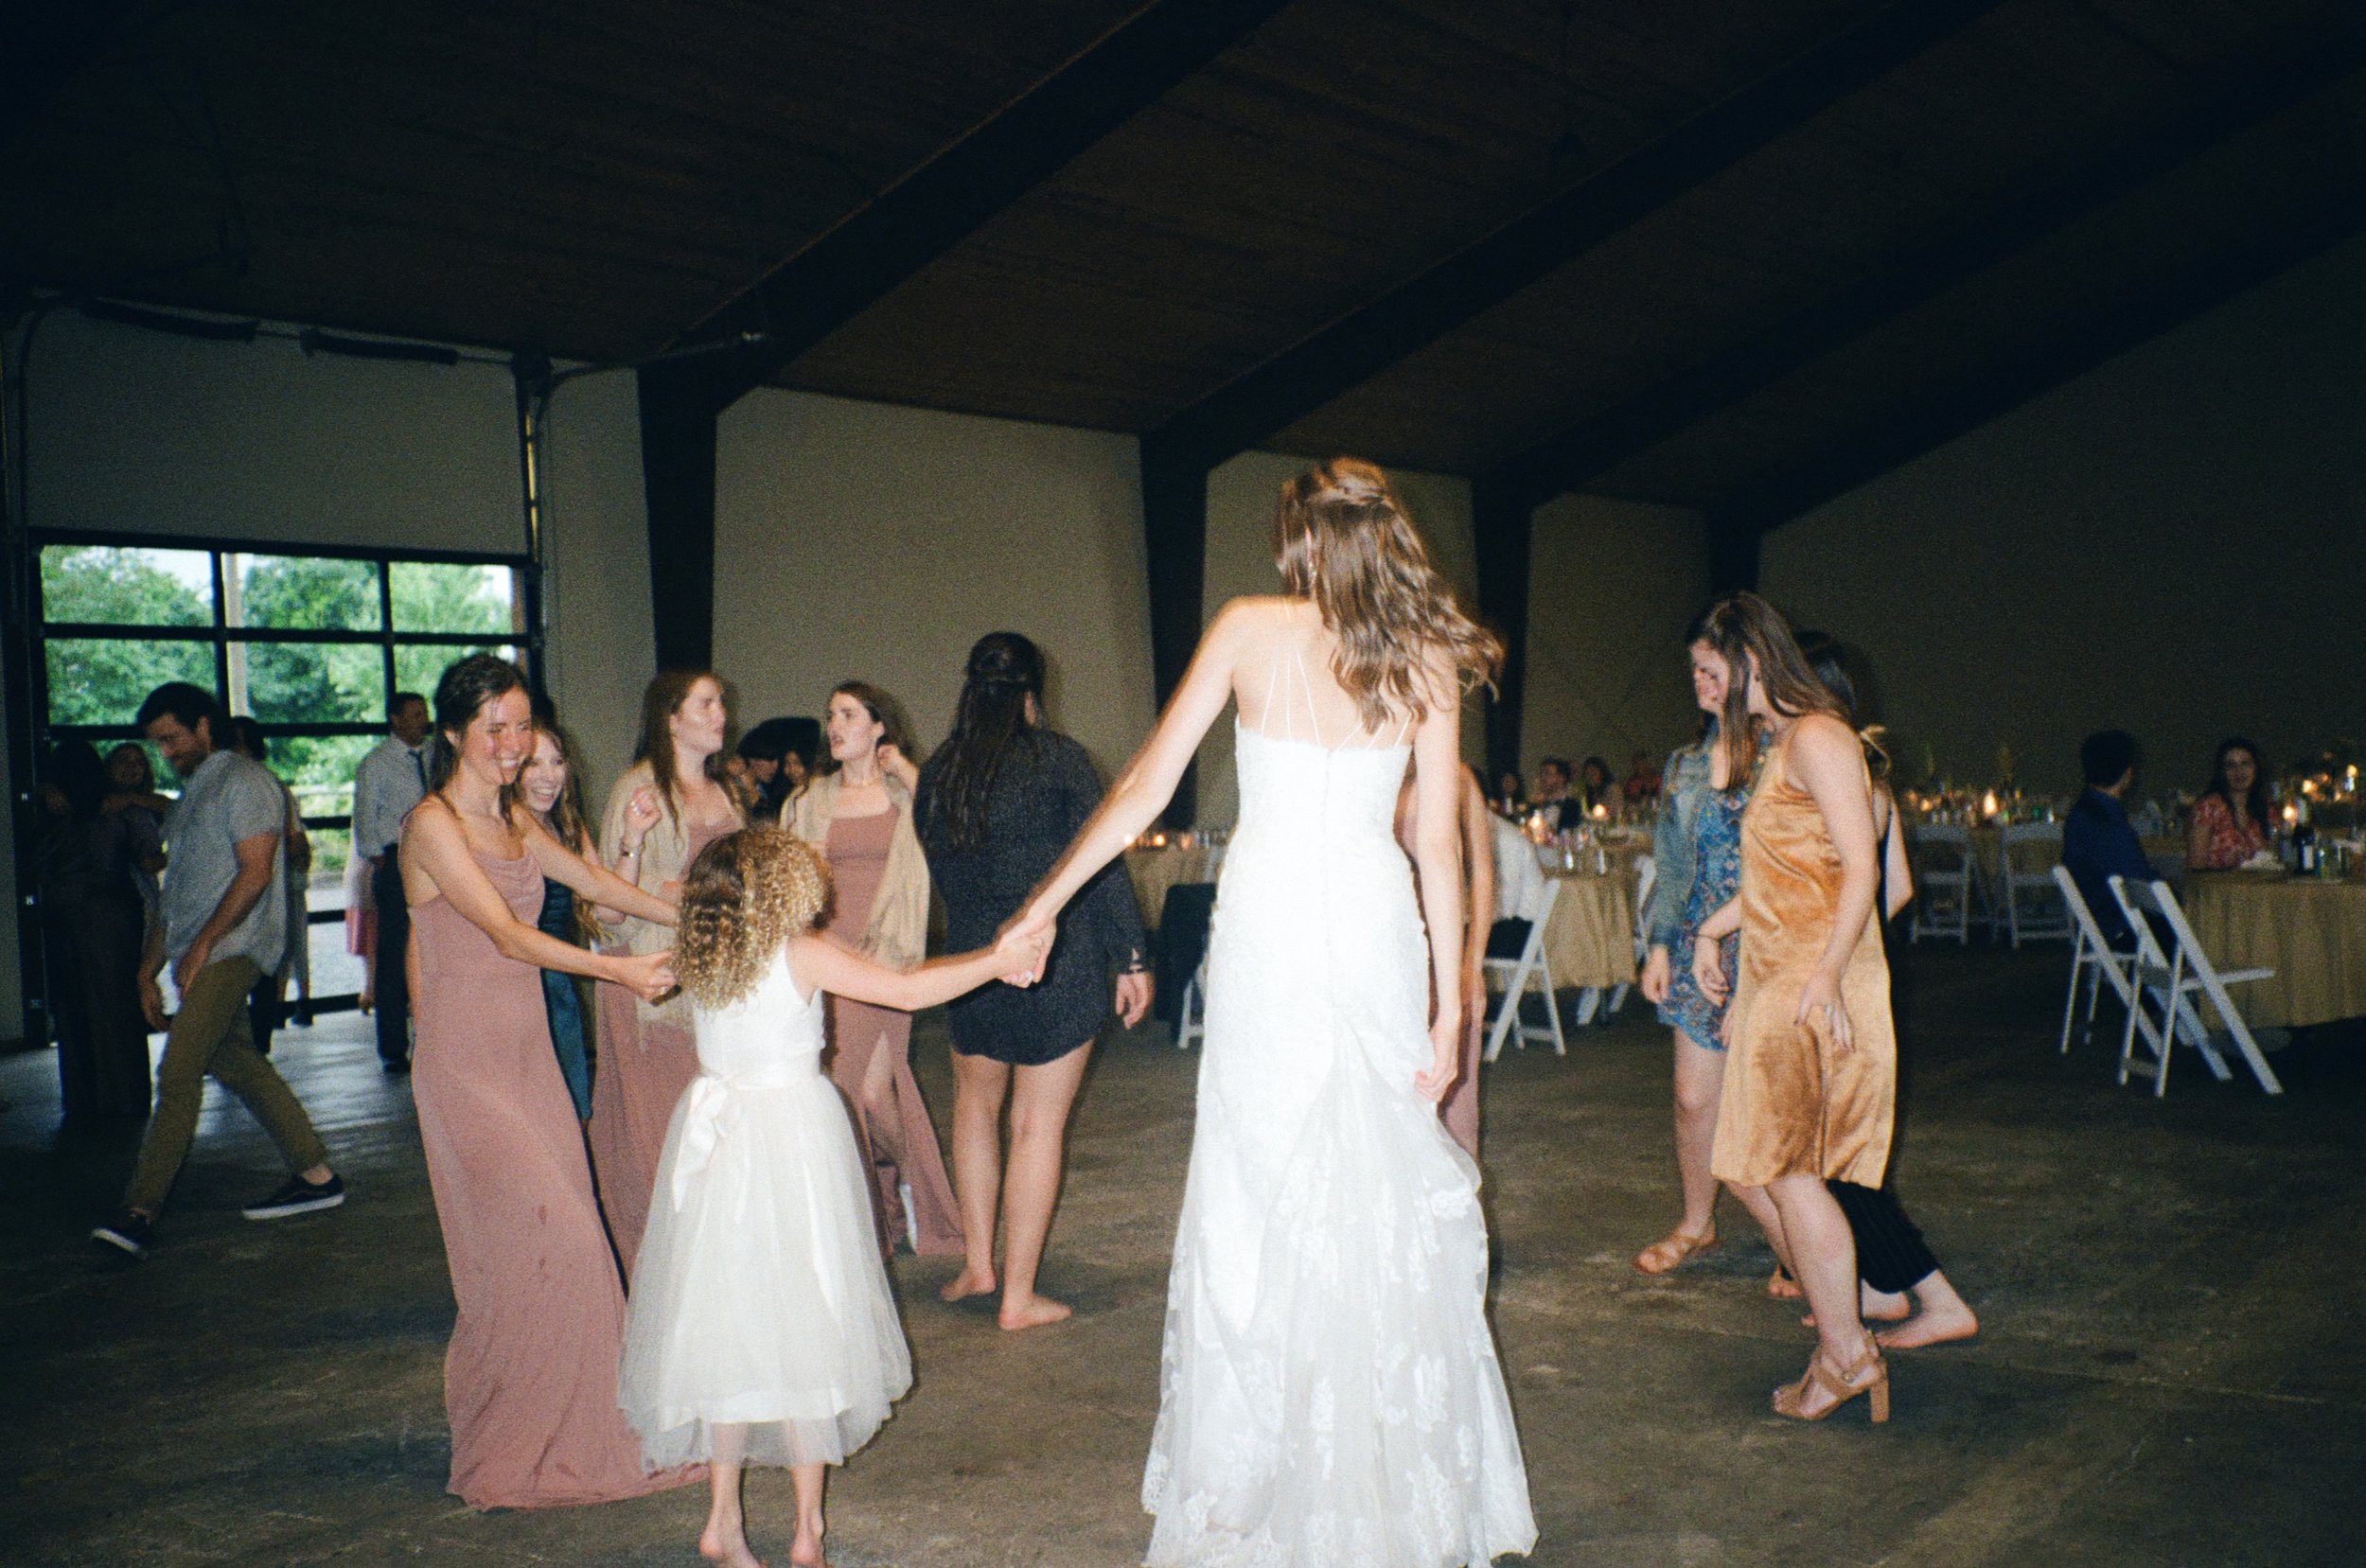 wedding dance party caught on film. film photography for weddings and engagements